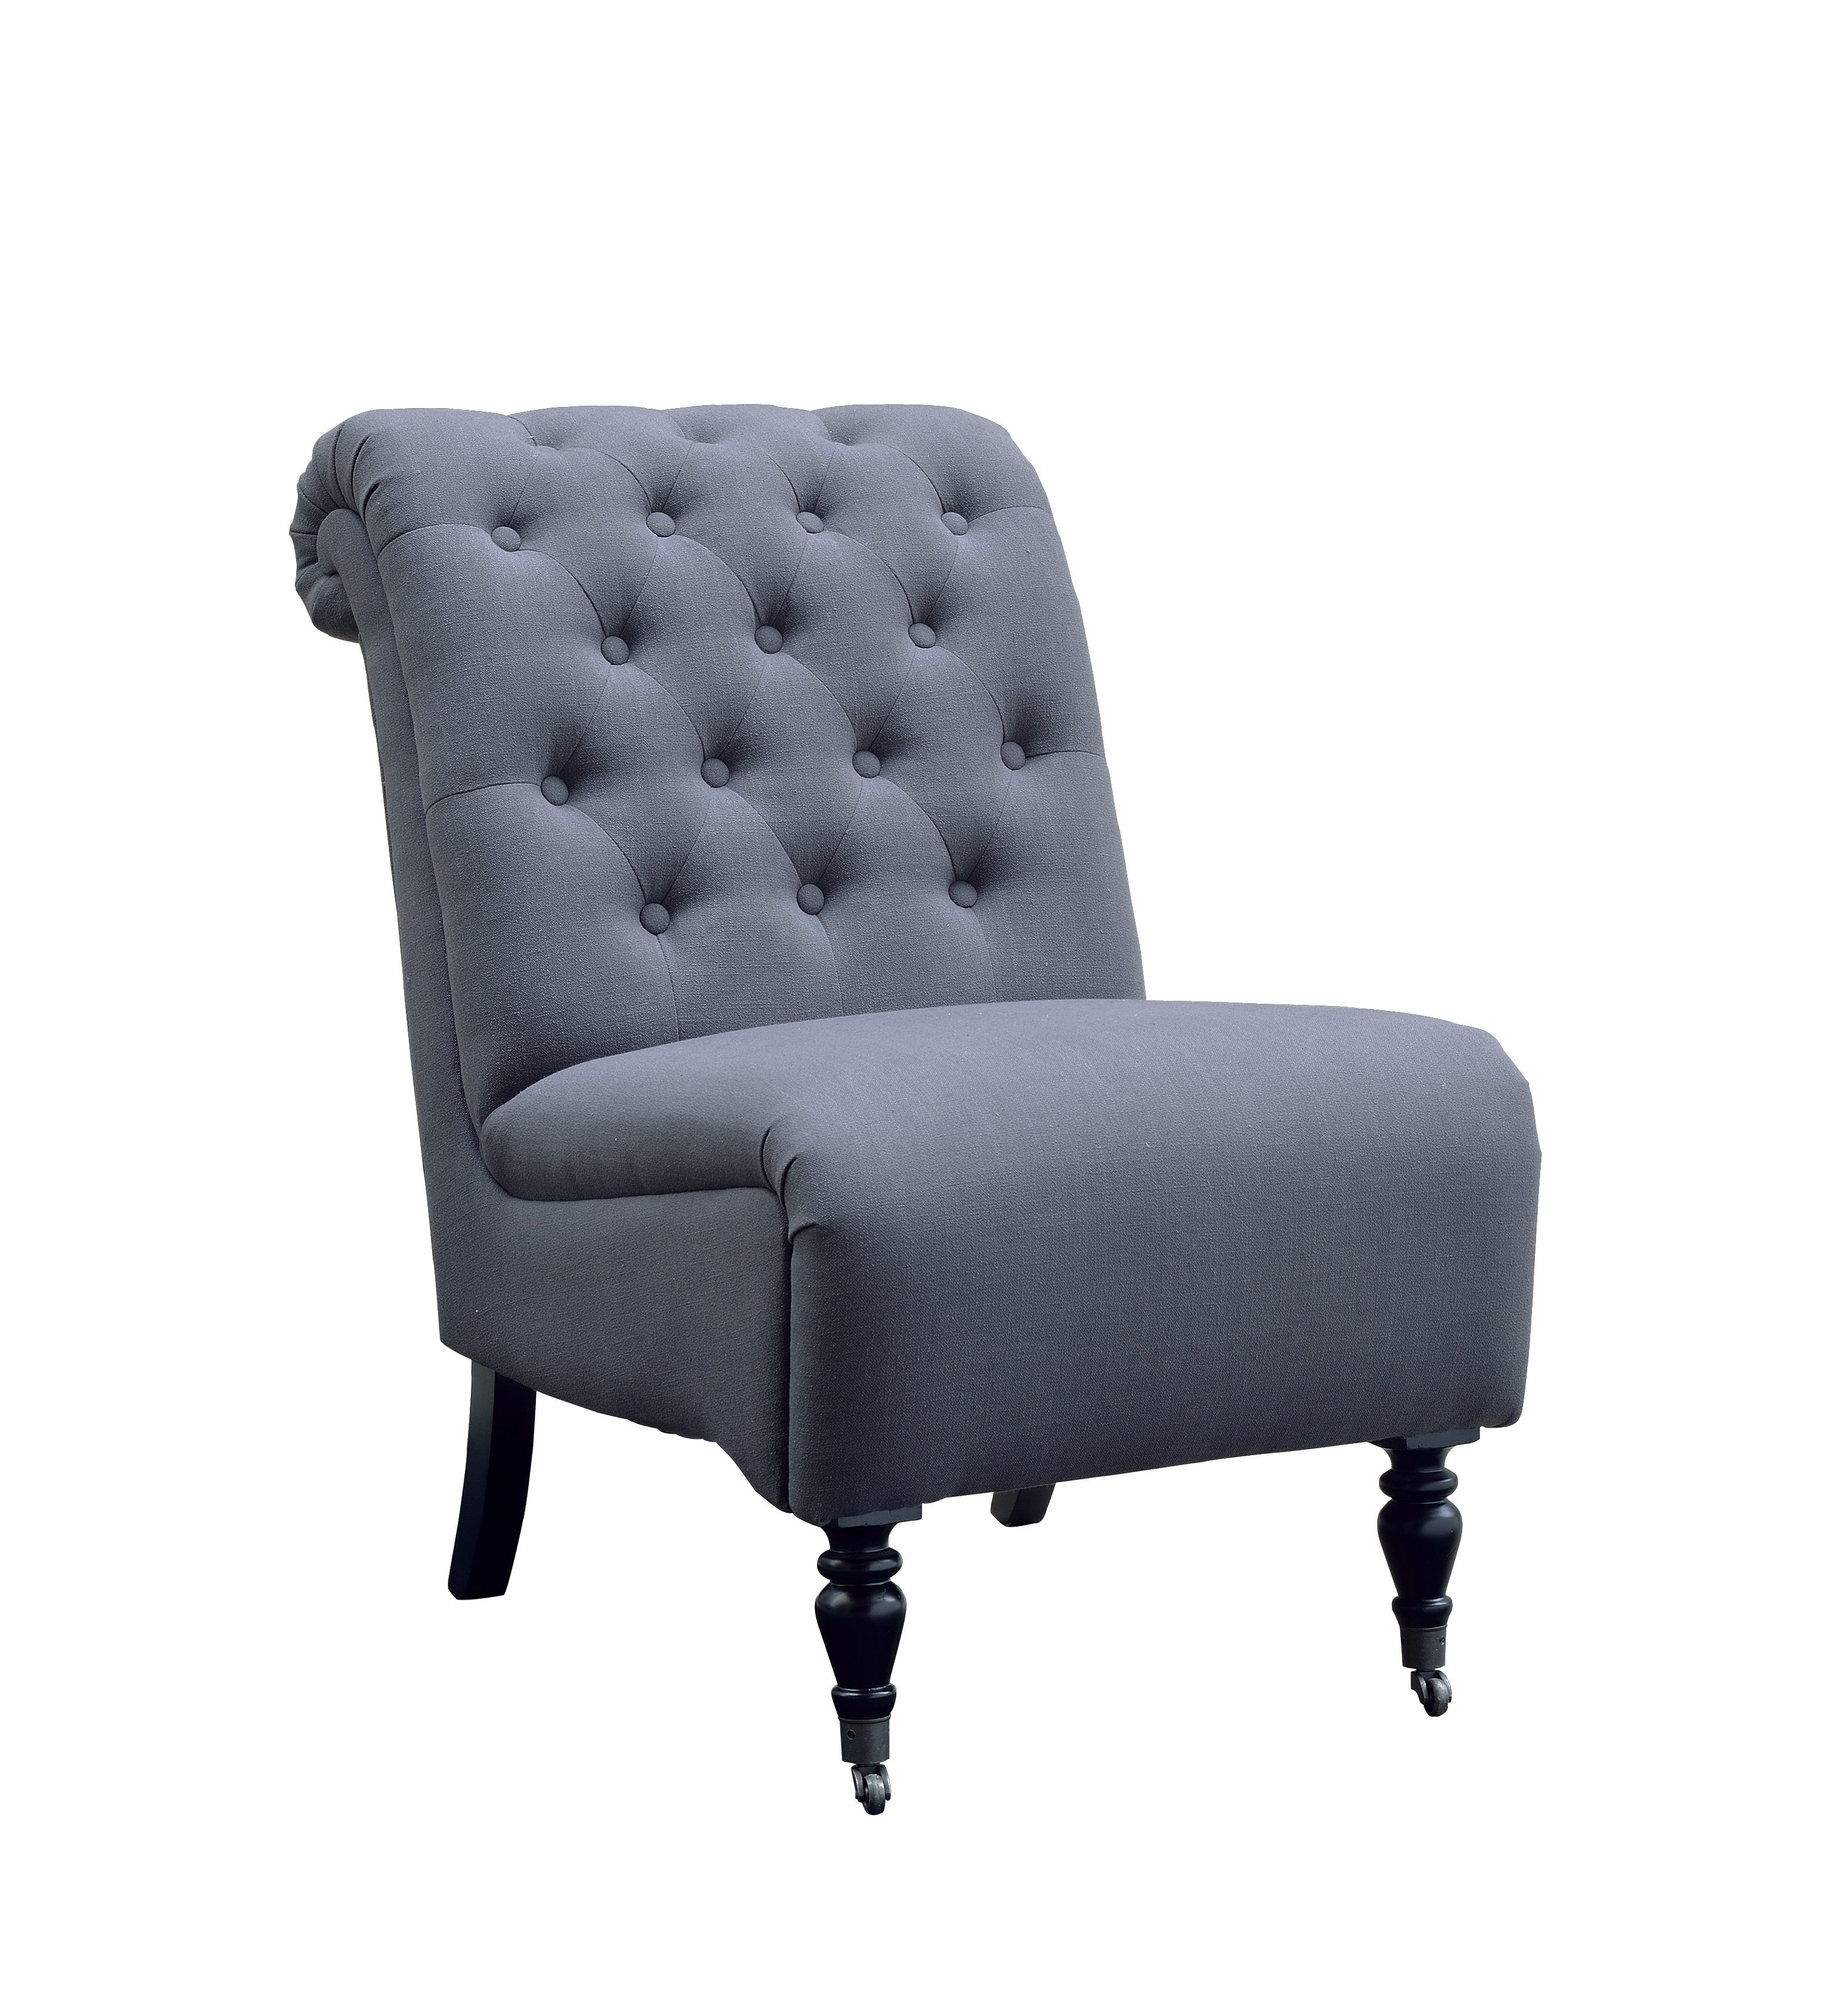 Cora Charcoal Roll Back Tufted Chair